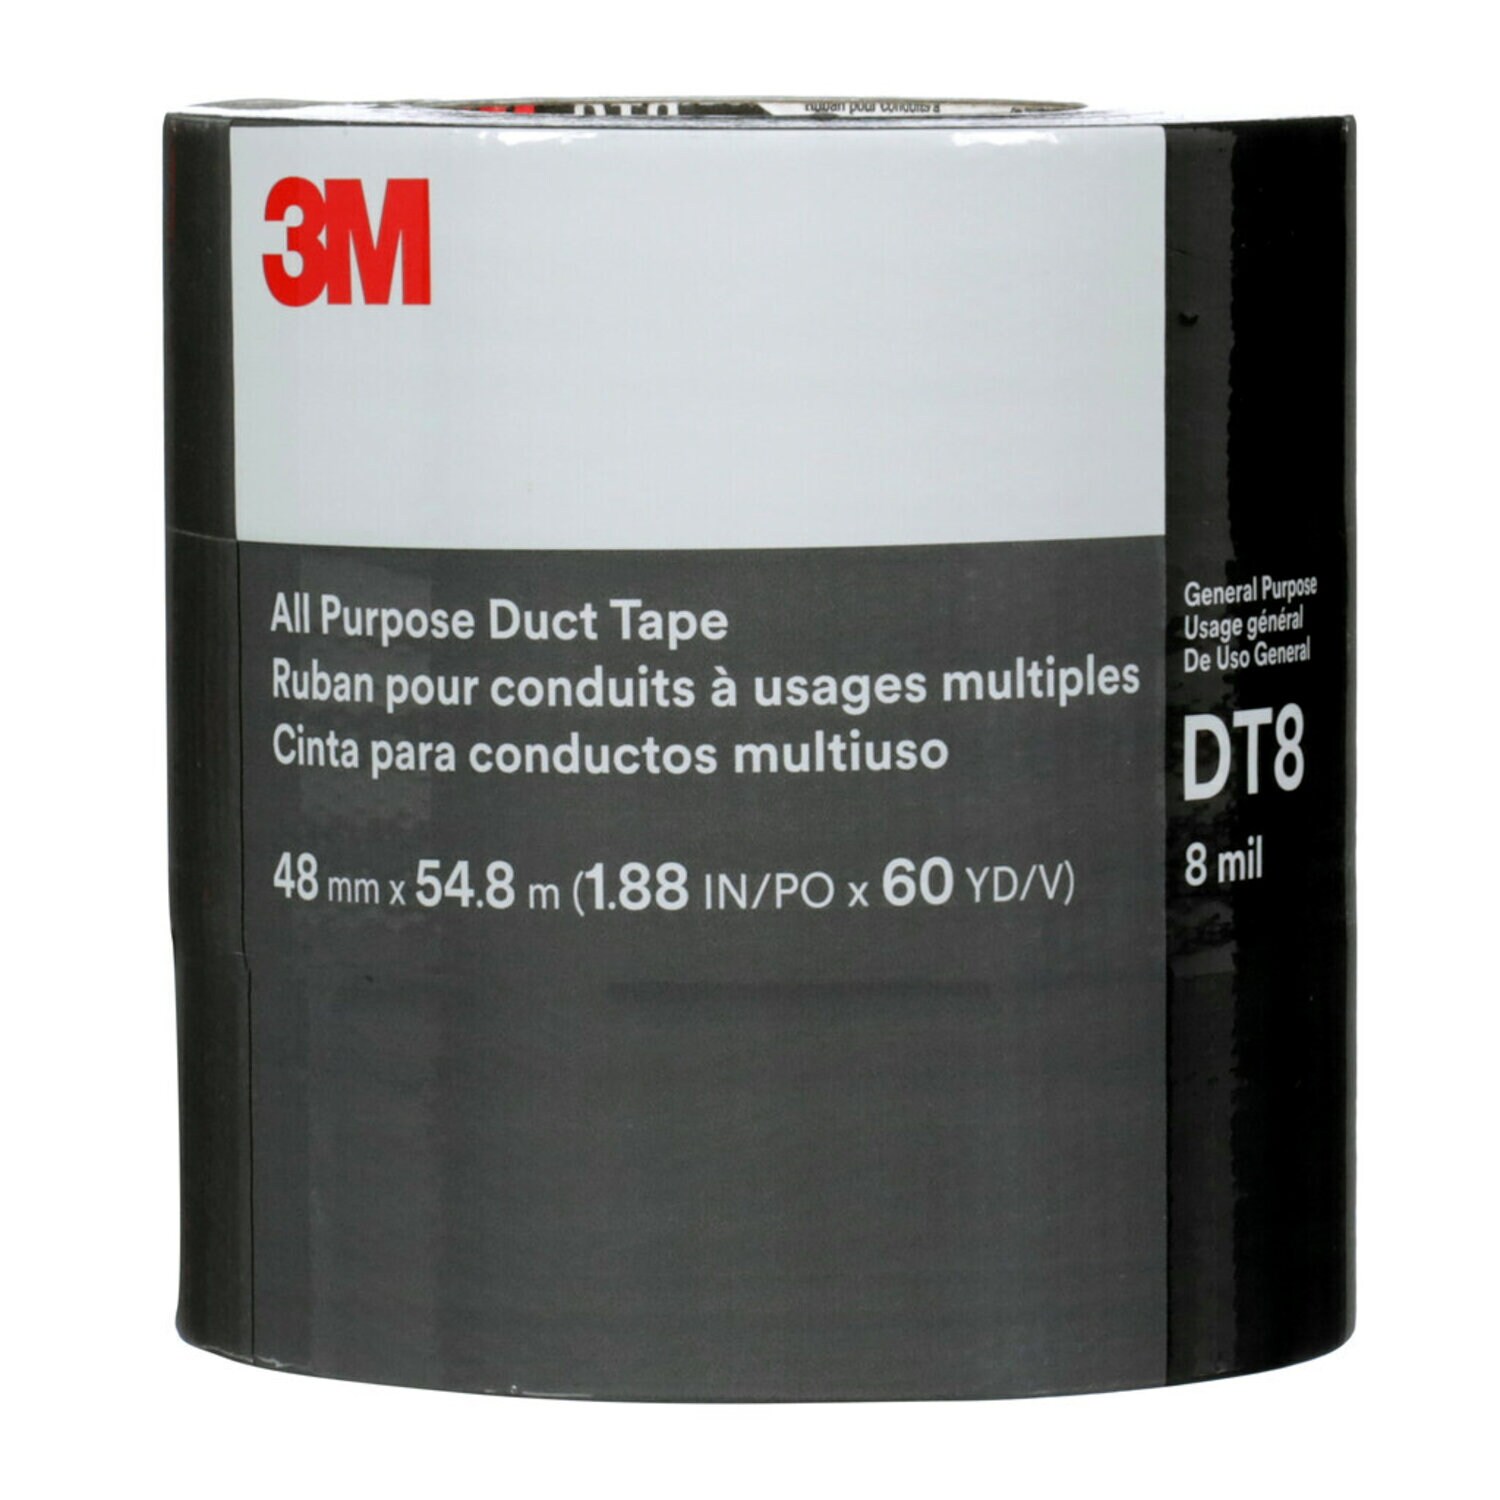 7100253423 - 3M All Purpose Duct Tape DT8, Silver, 48 mm x 54.8 m, 8 mil, (3
Roll/Pack) 24 Roll/Case